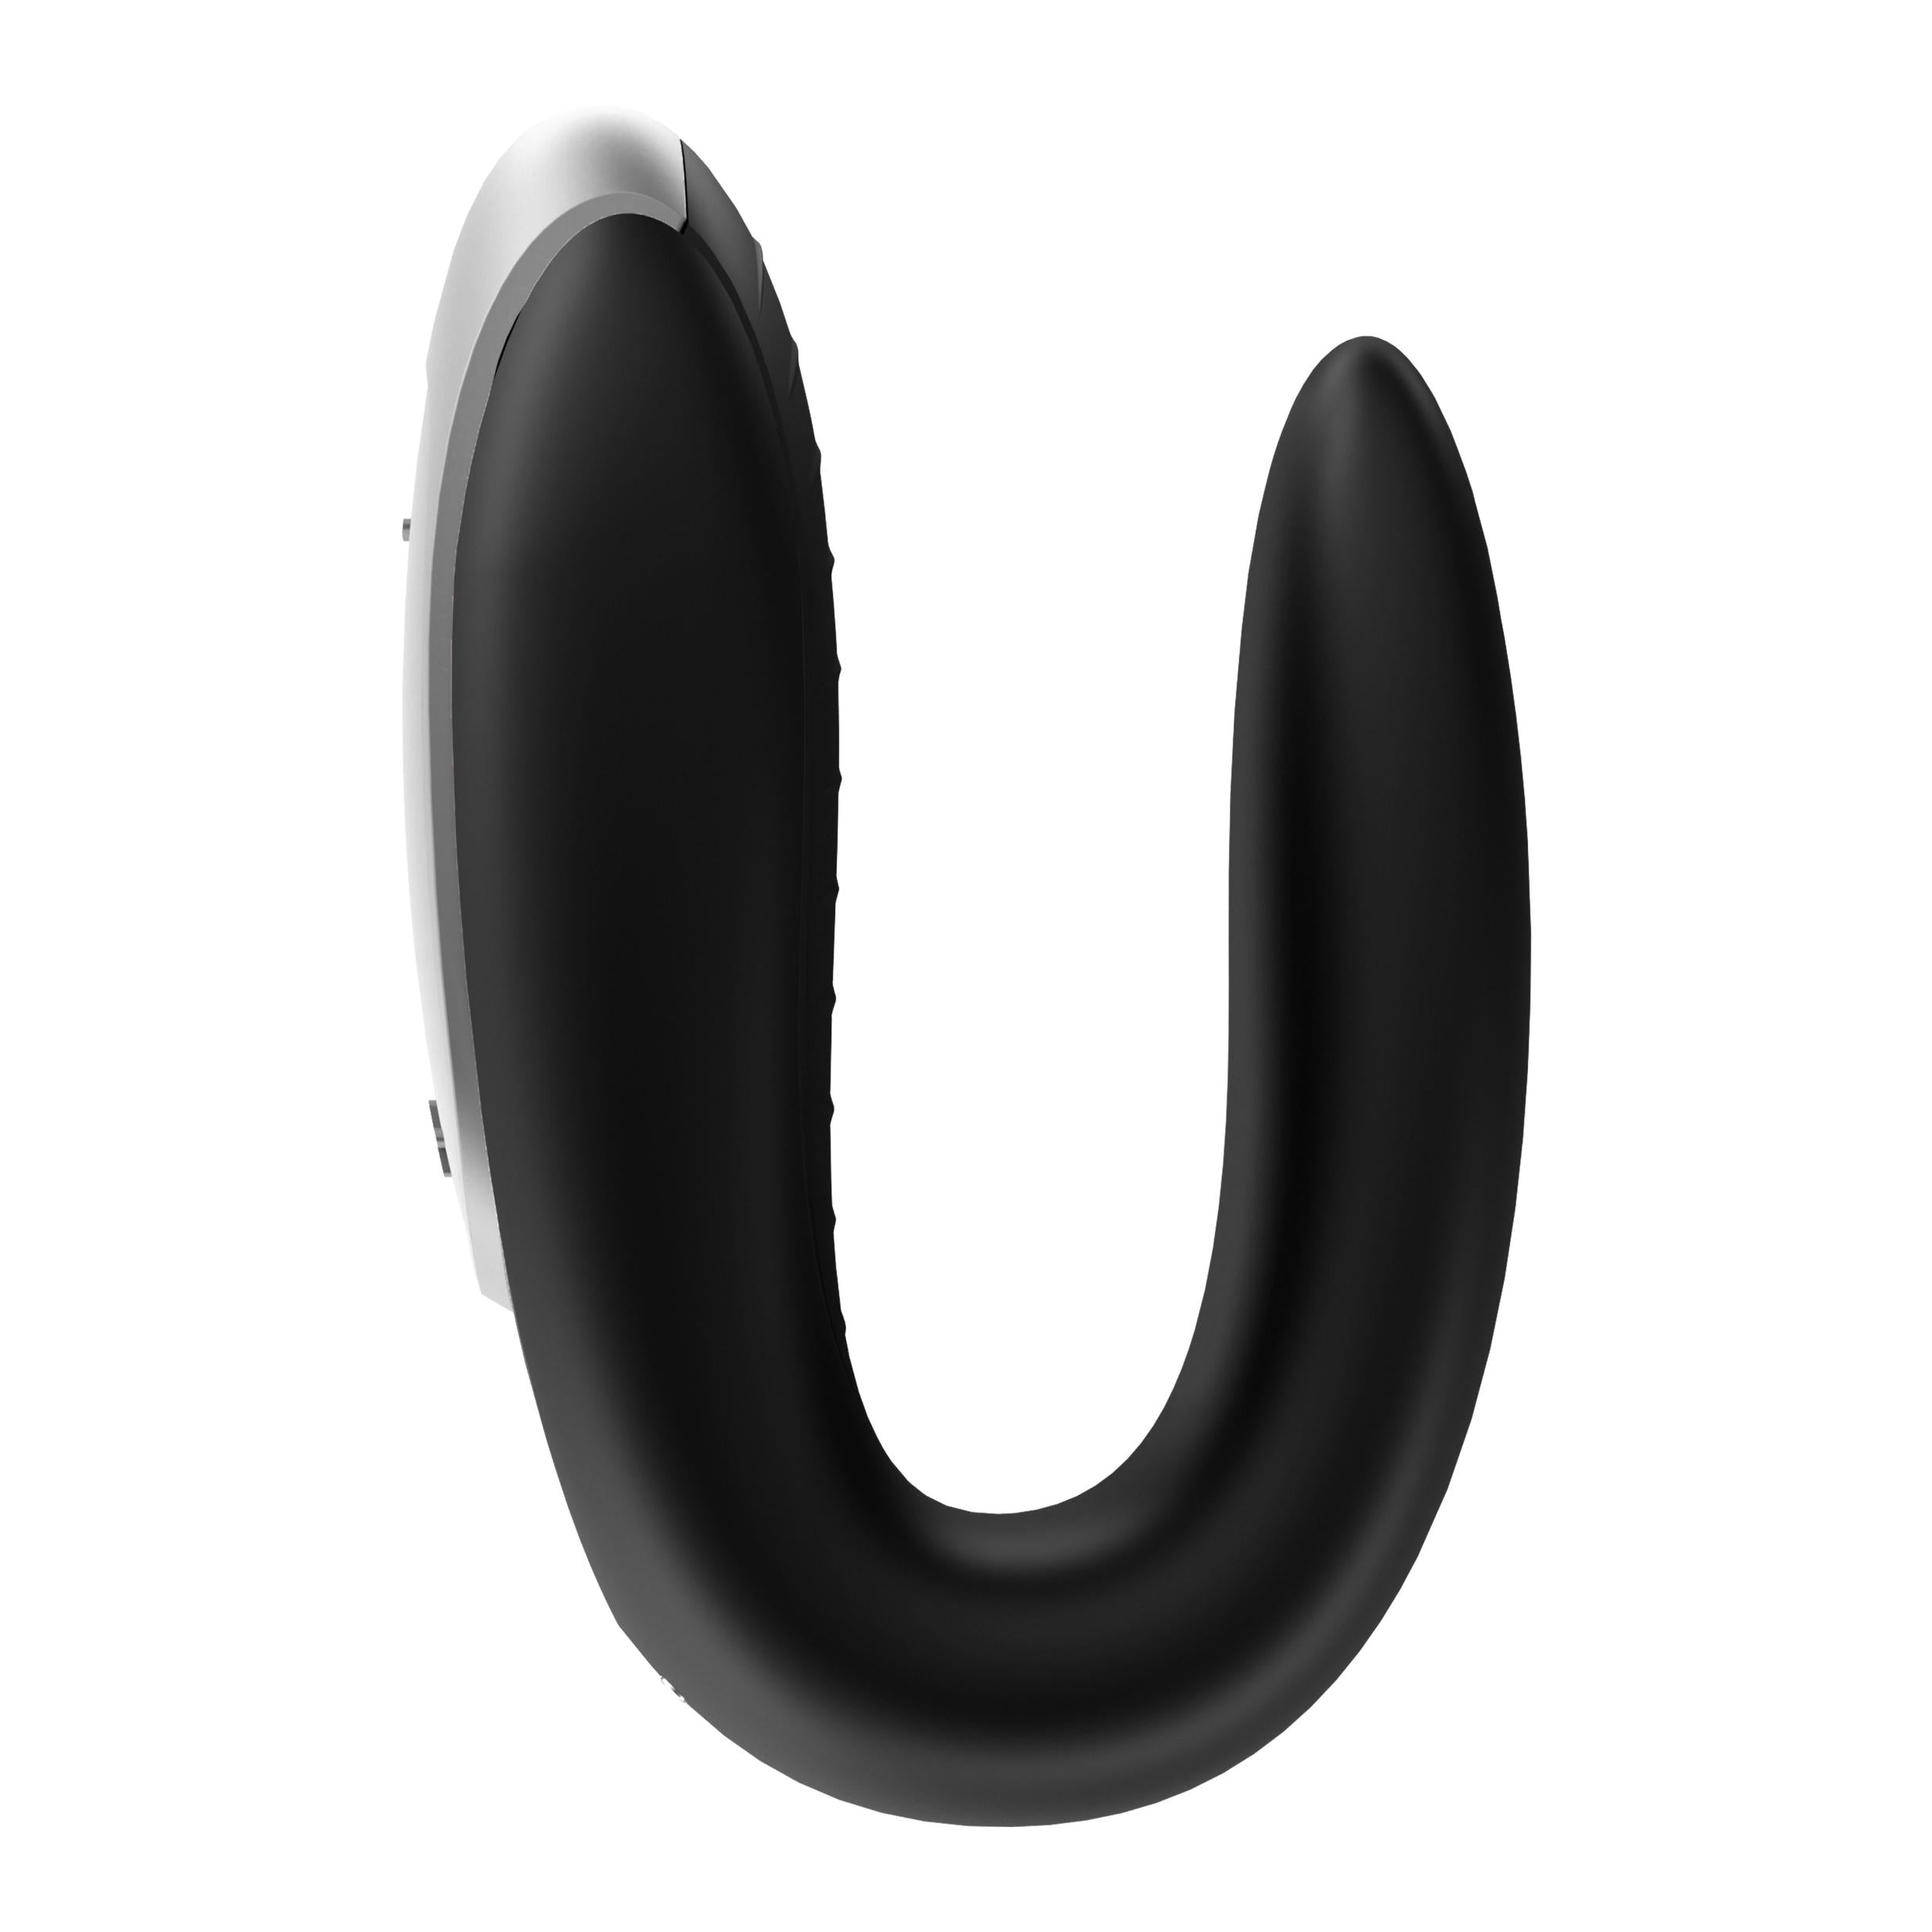 Satisfyer Double Fun Vaginal and Clitoral Vibrator Black